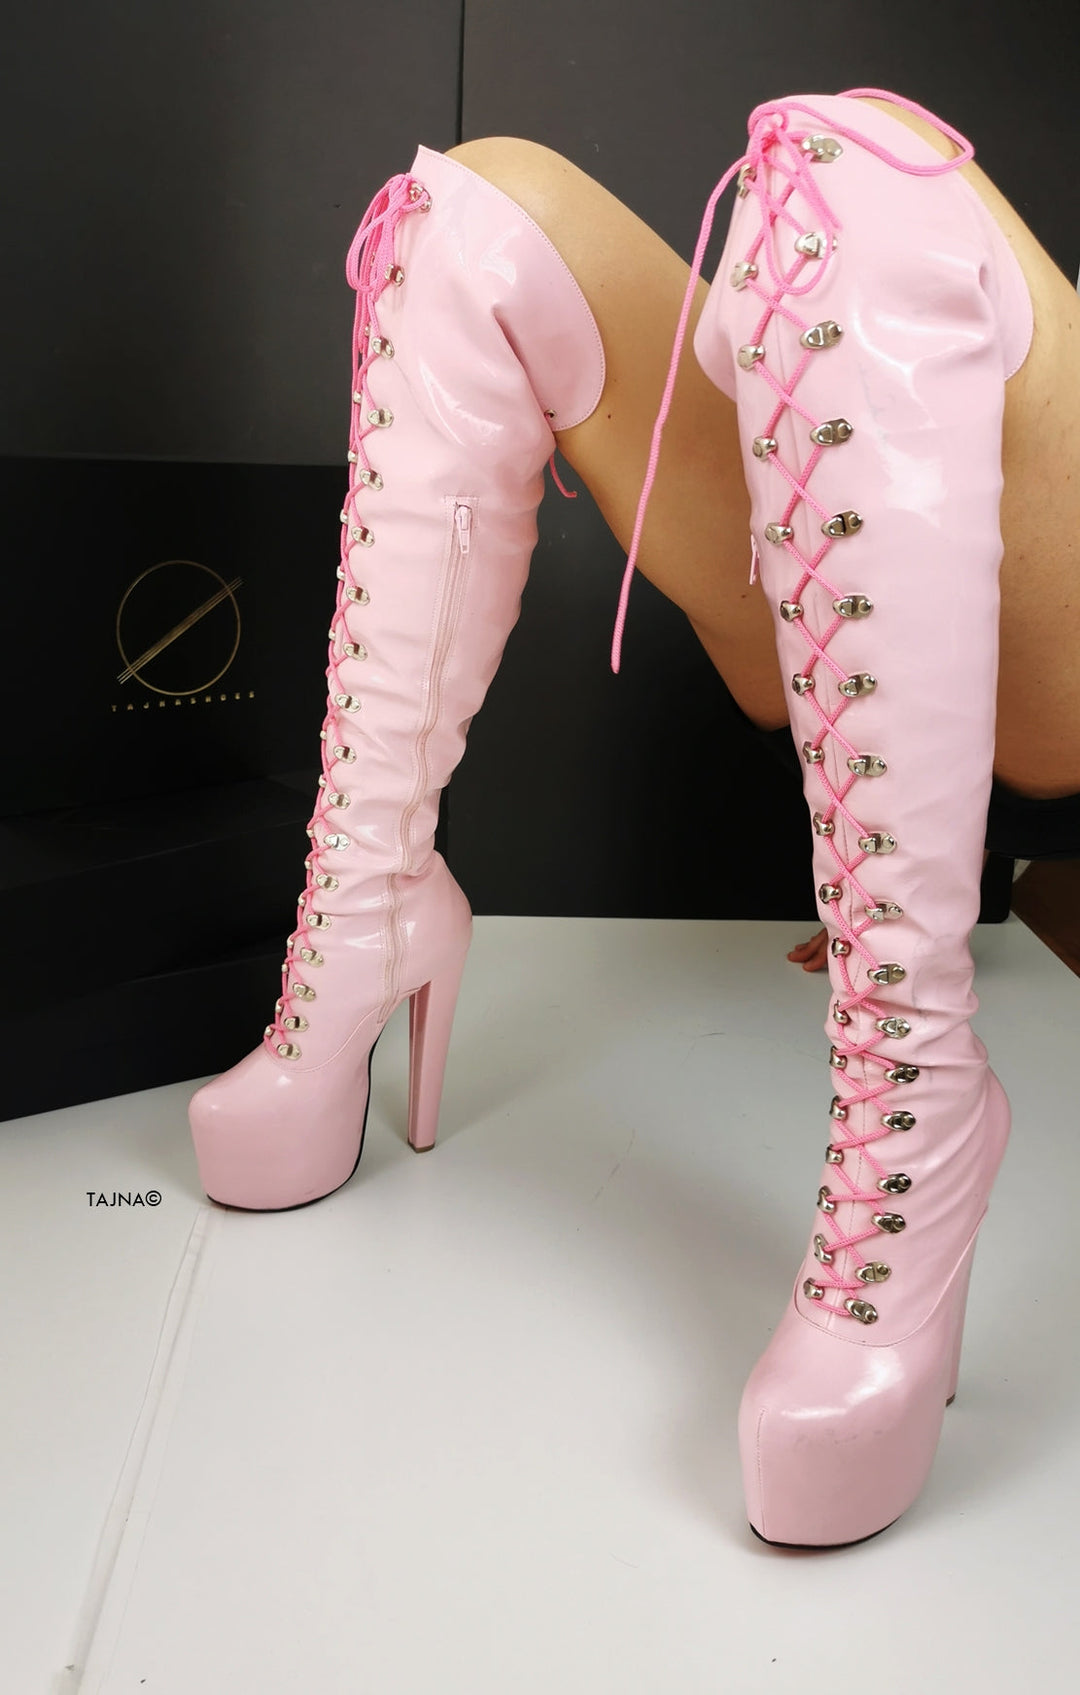 Light Pink Patent Military Style Lace Up Boots - Tajna Club